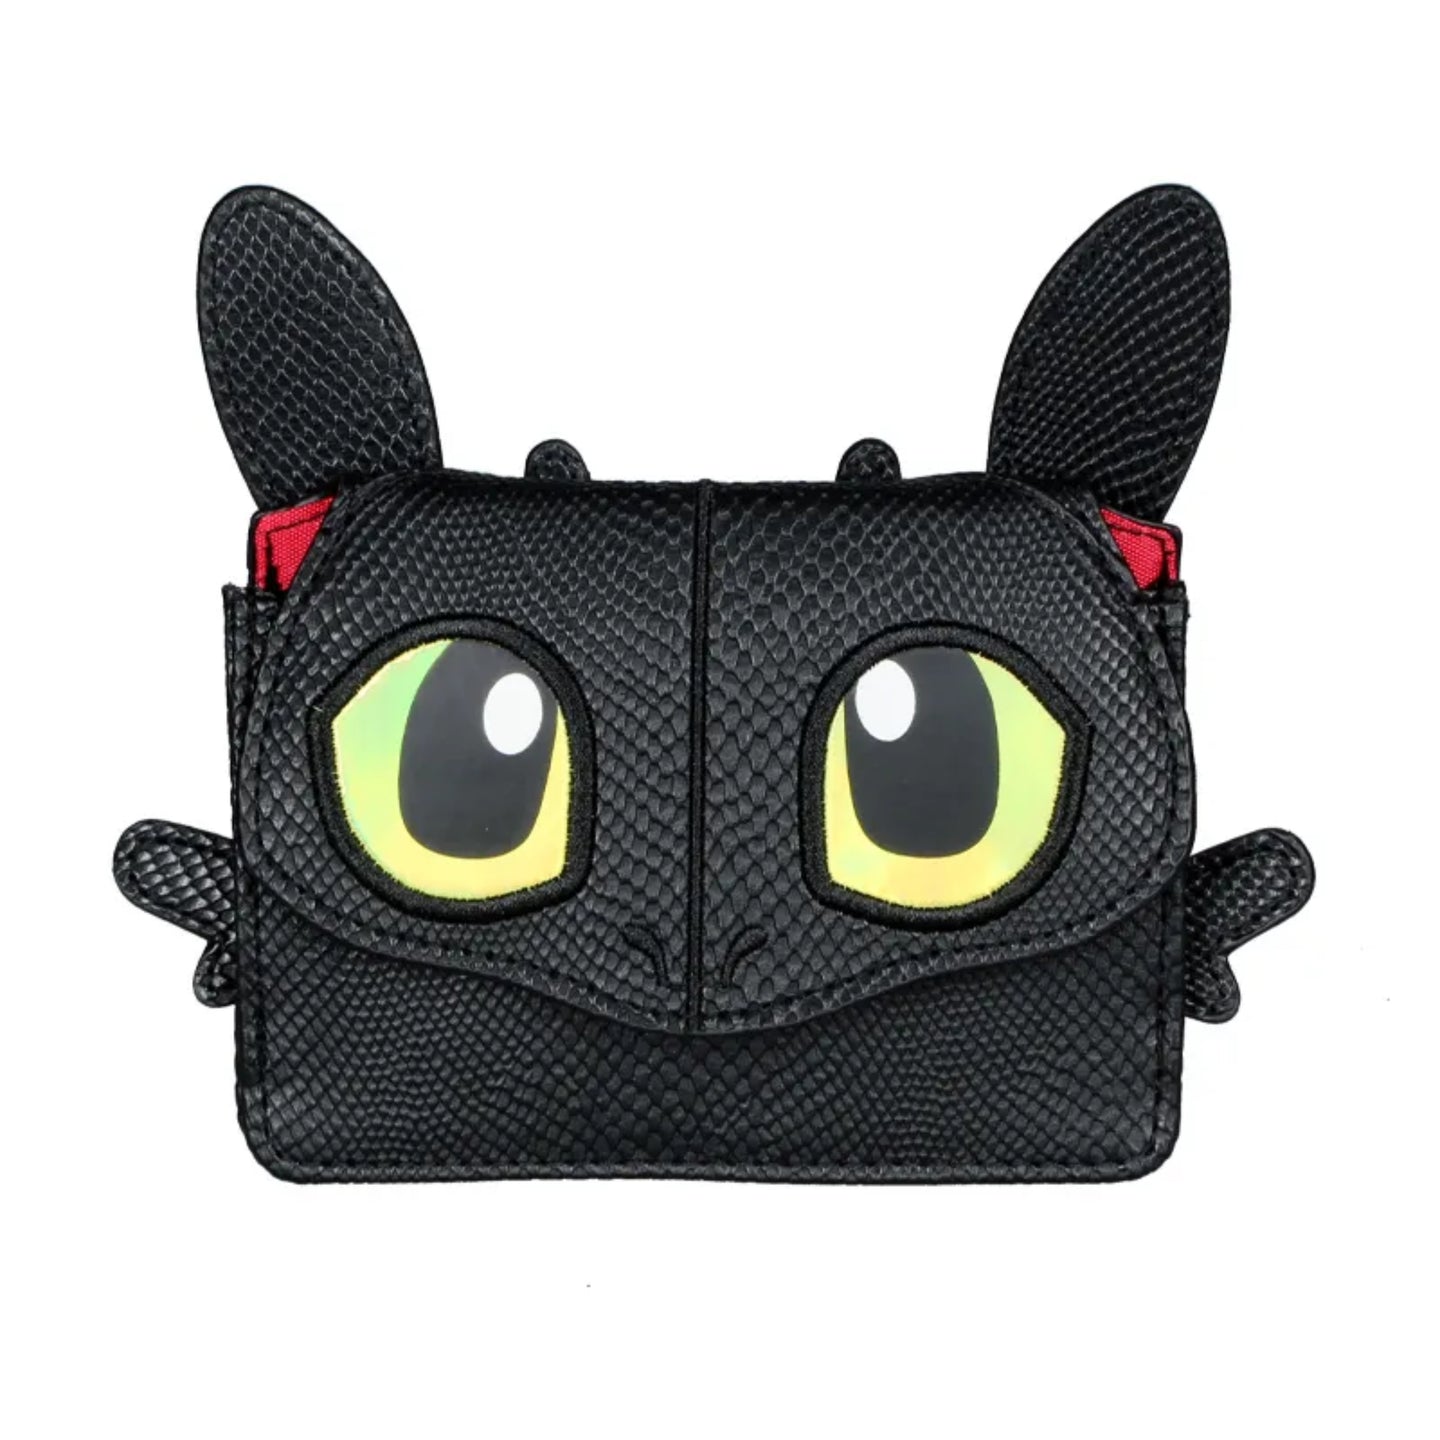 Toothless Dragon Coin Wallet